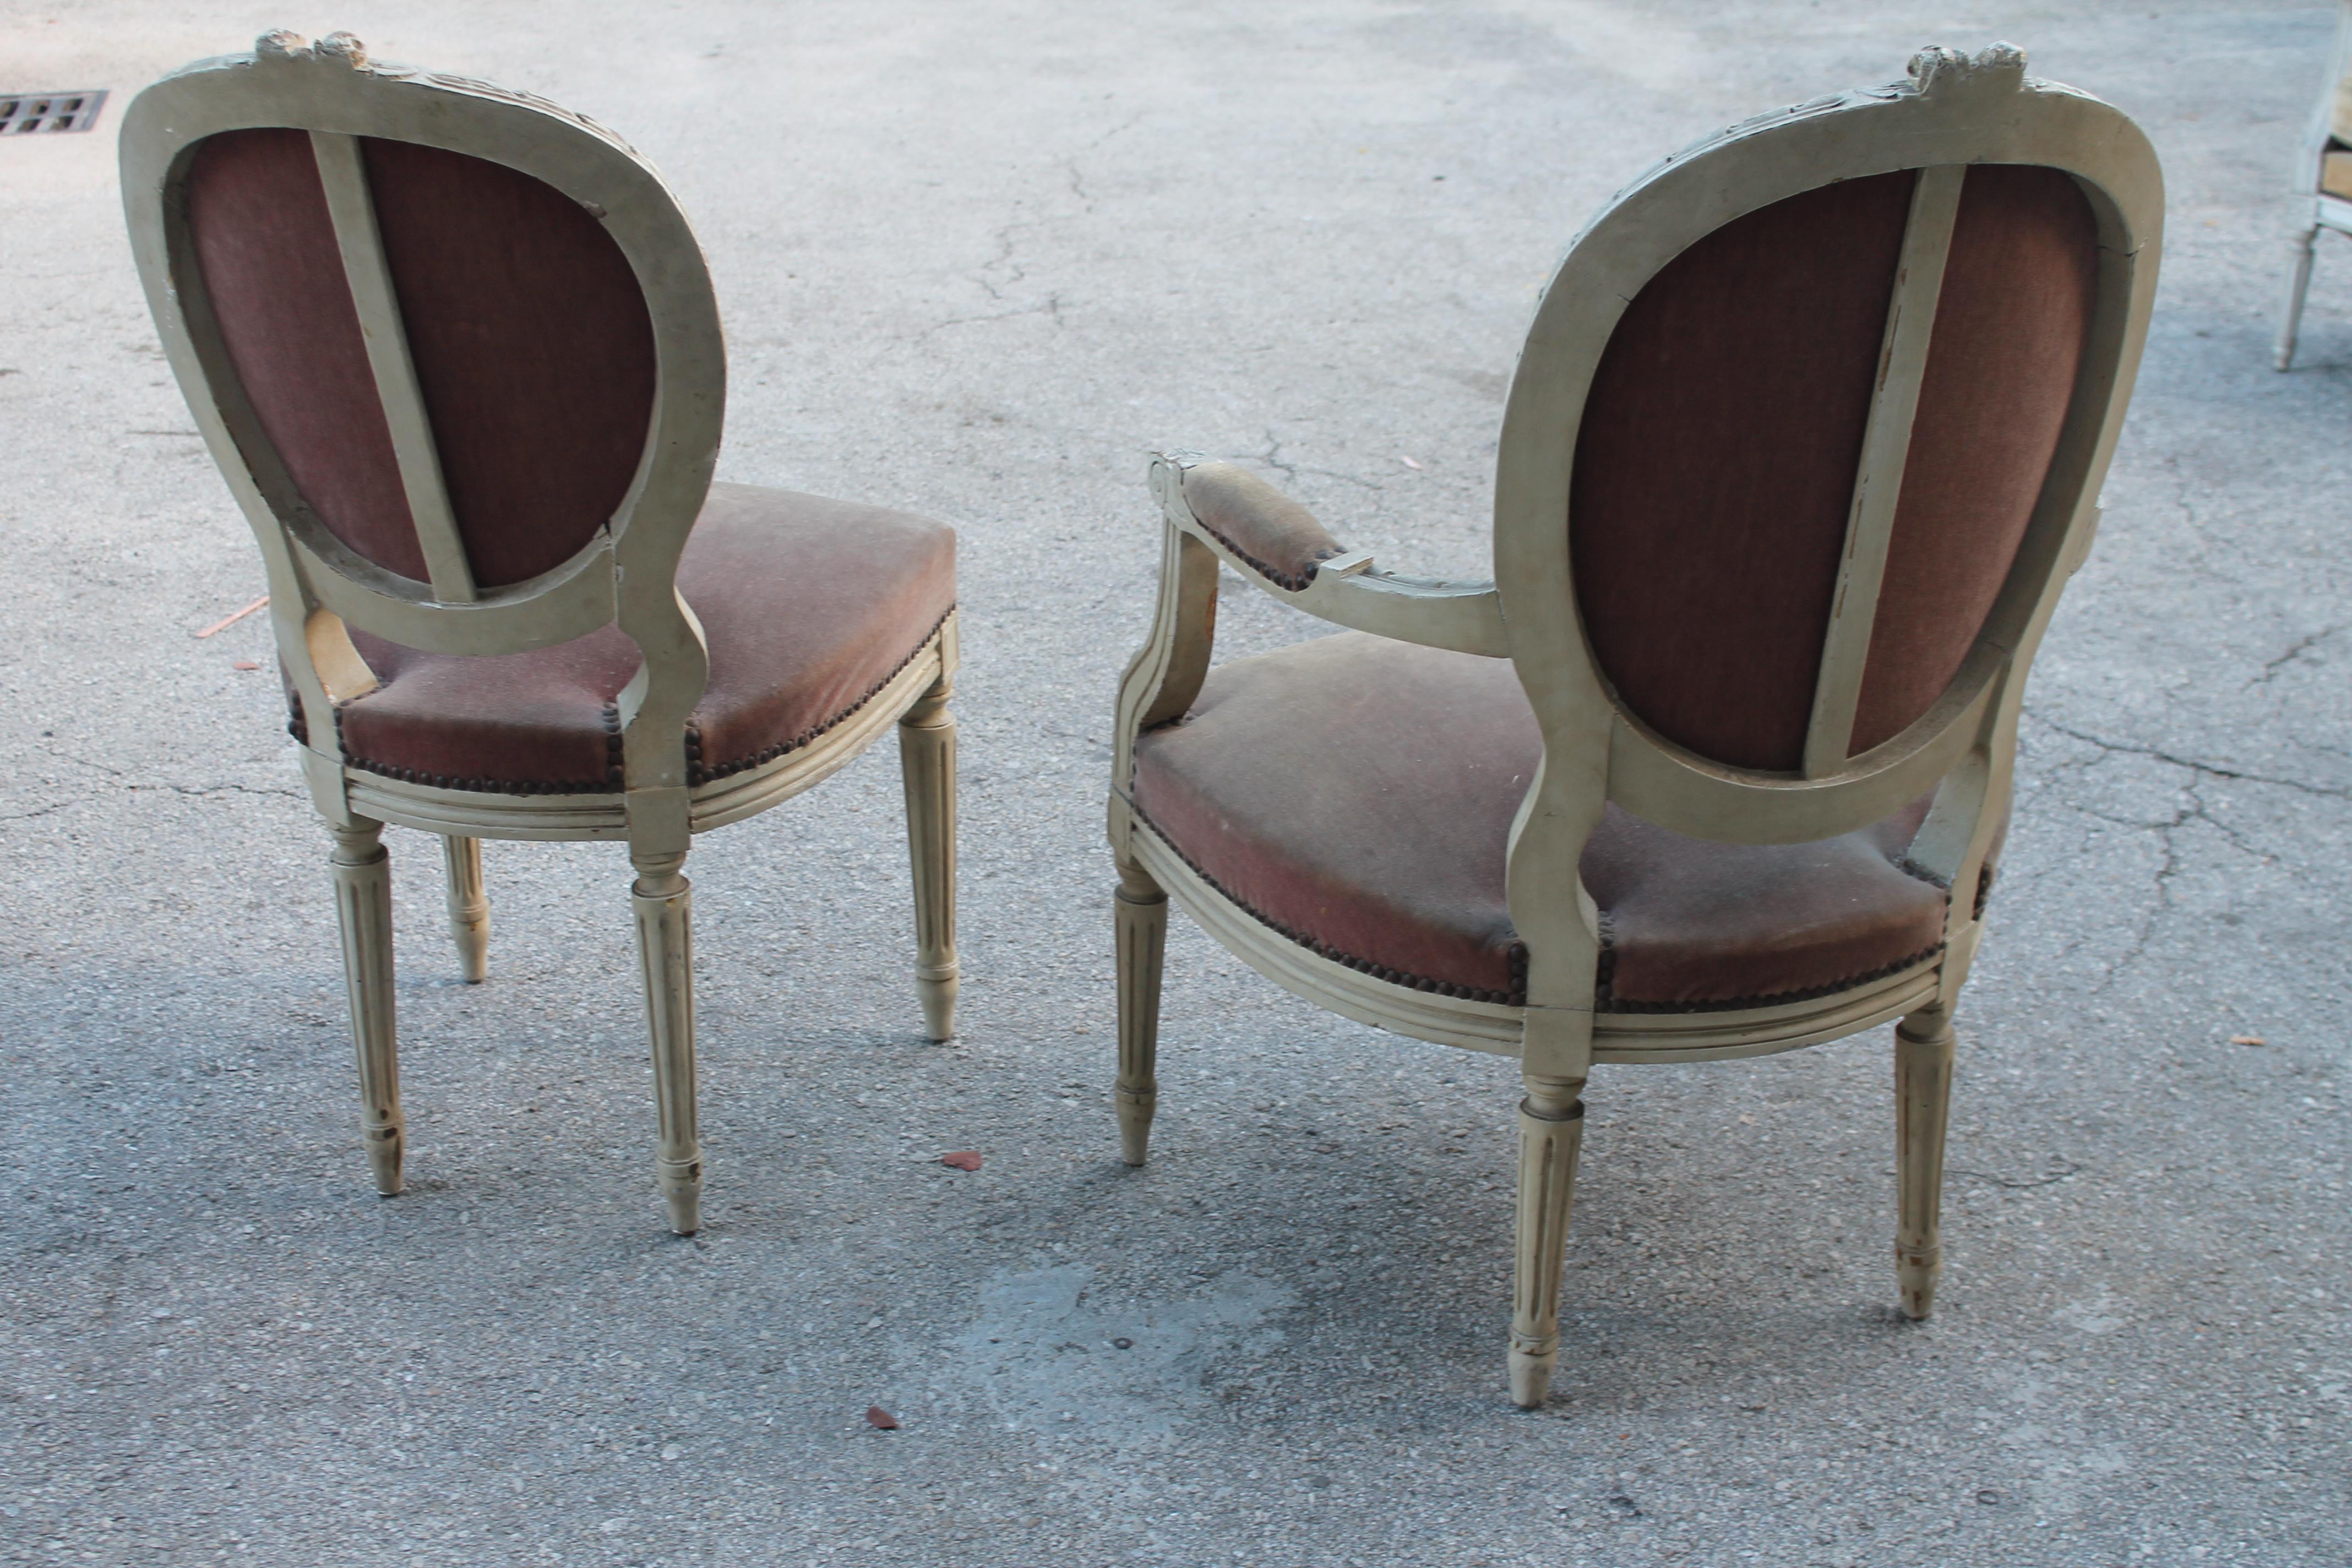  19thc French Louis XVI Arm Chair and Side Chair [2 piece] For Sale 4